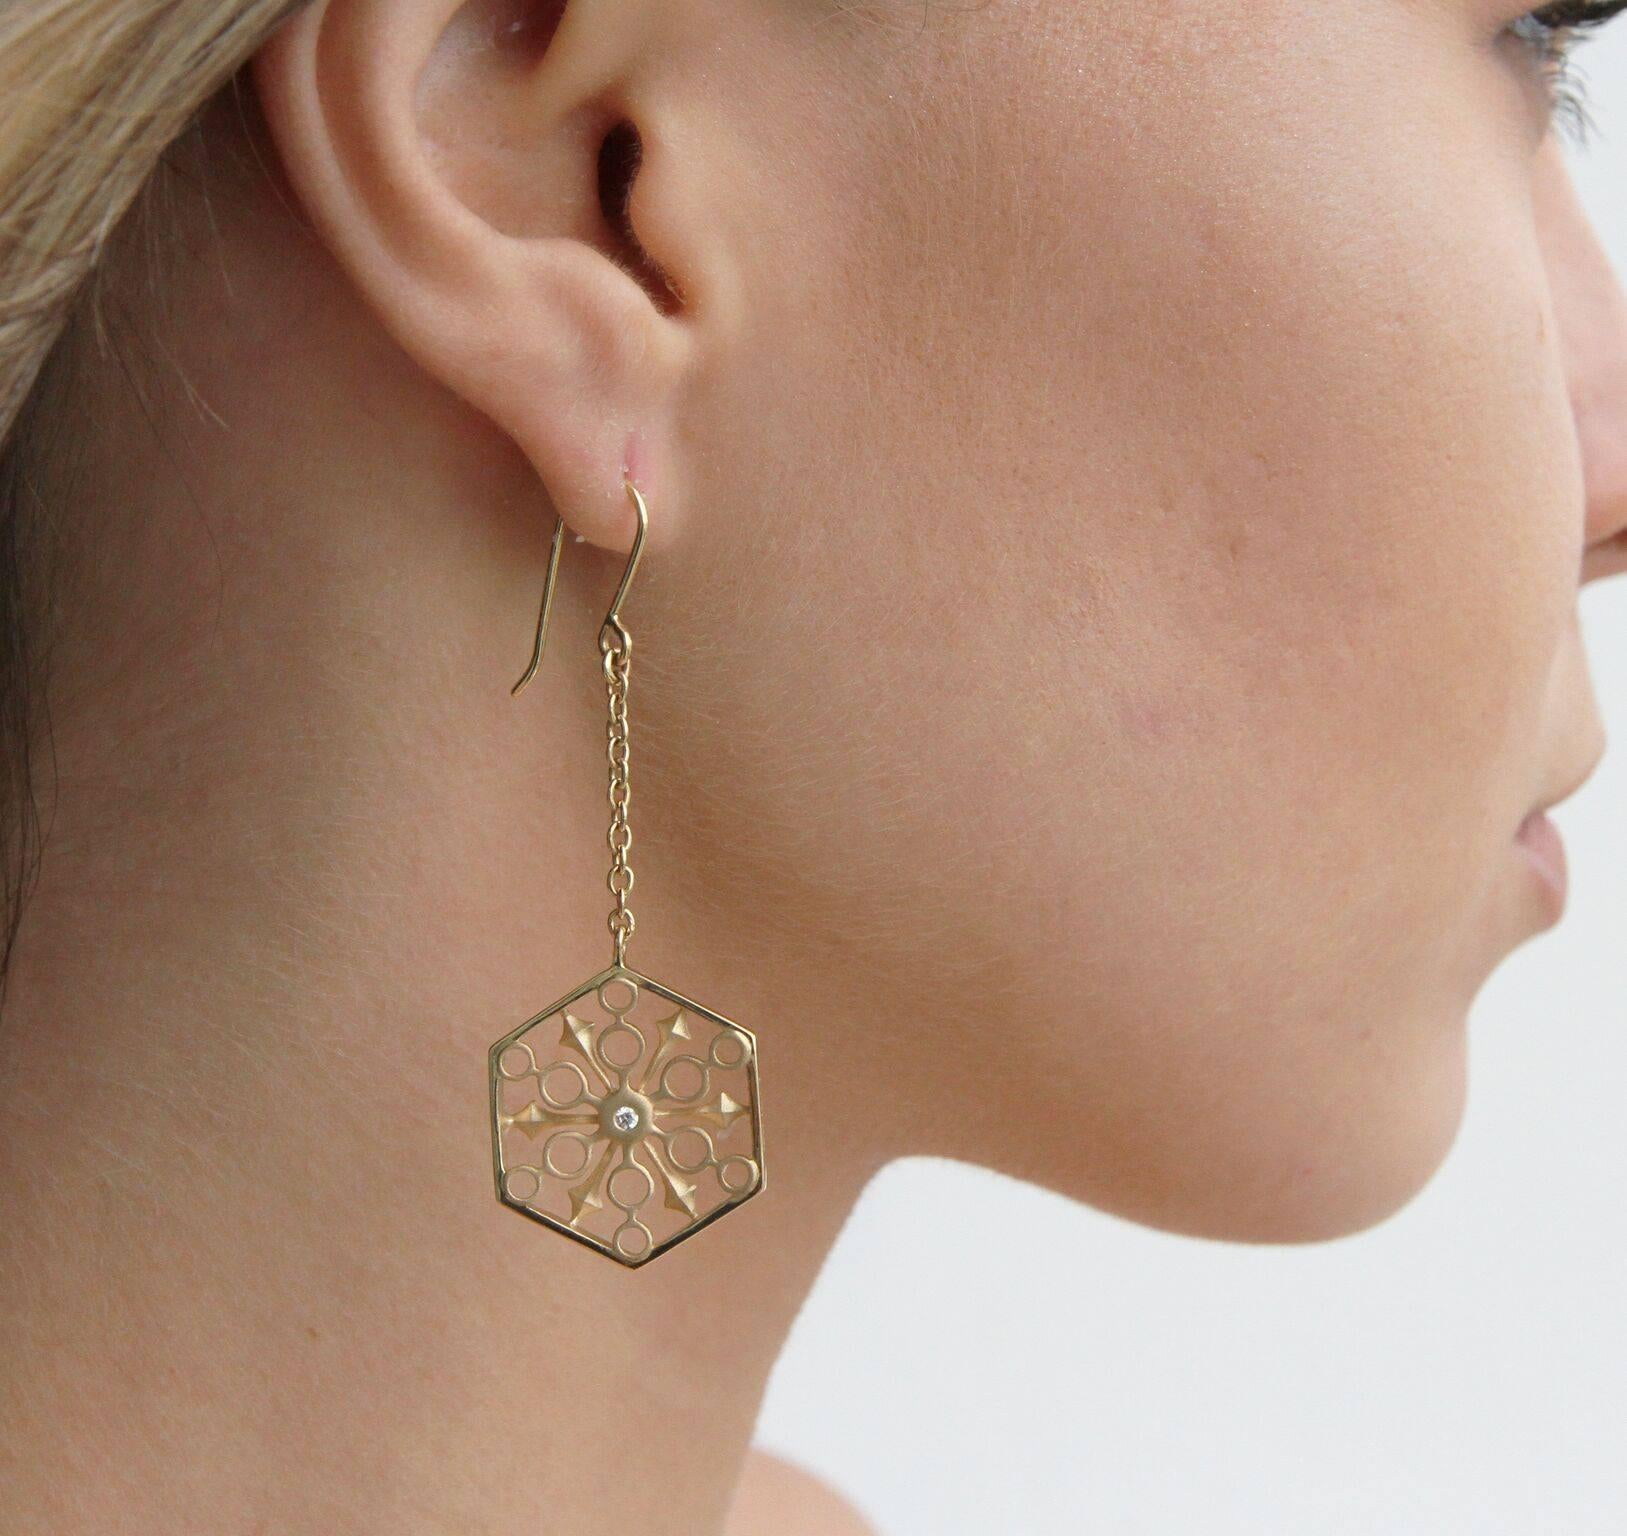 These limited edition Snowflakes Power Gold Earrings sparkle with strength. The diamonds are meant to invoke power and clarity. This piece is part of John Brevard’s THOSCENE Collection.  The 18K yellow gold earrings feature two round, white diamonds